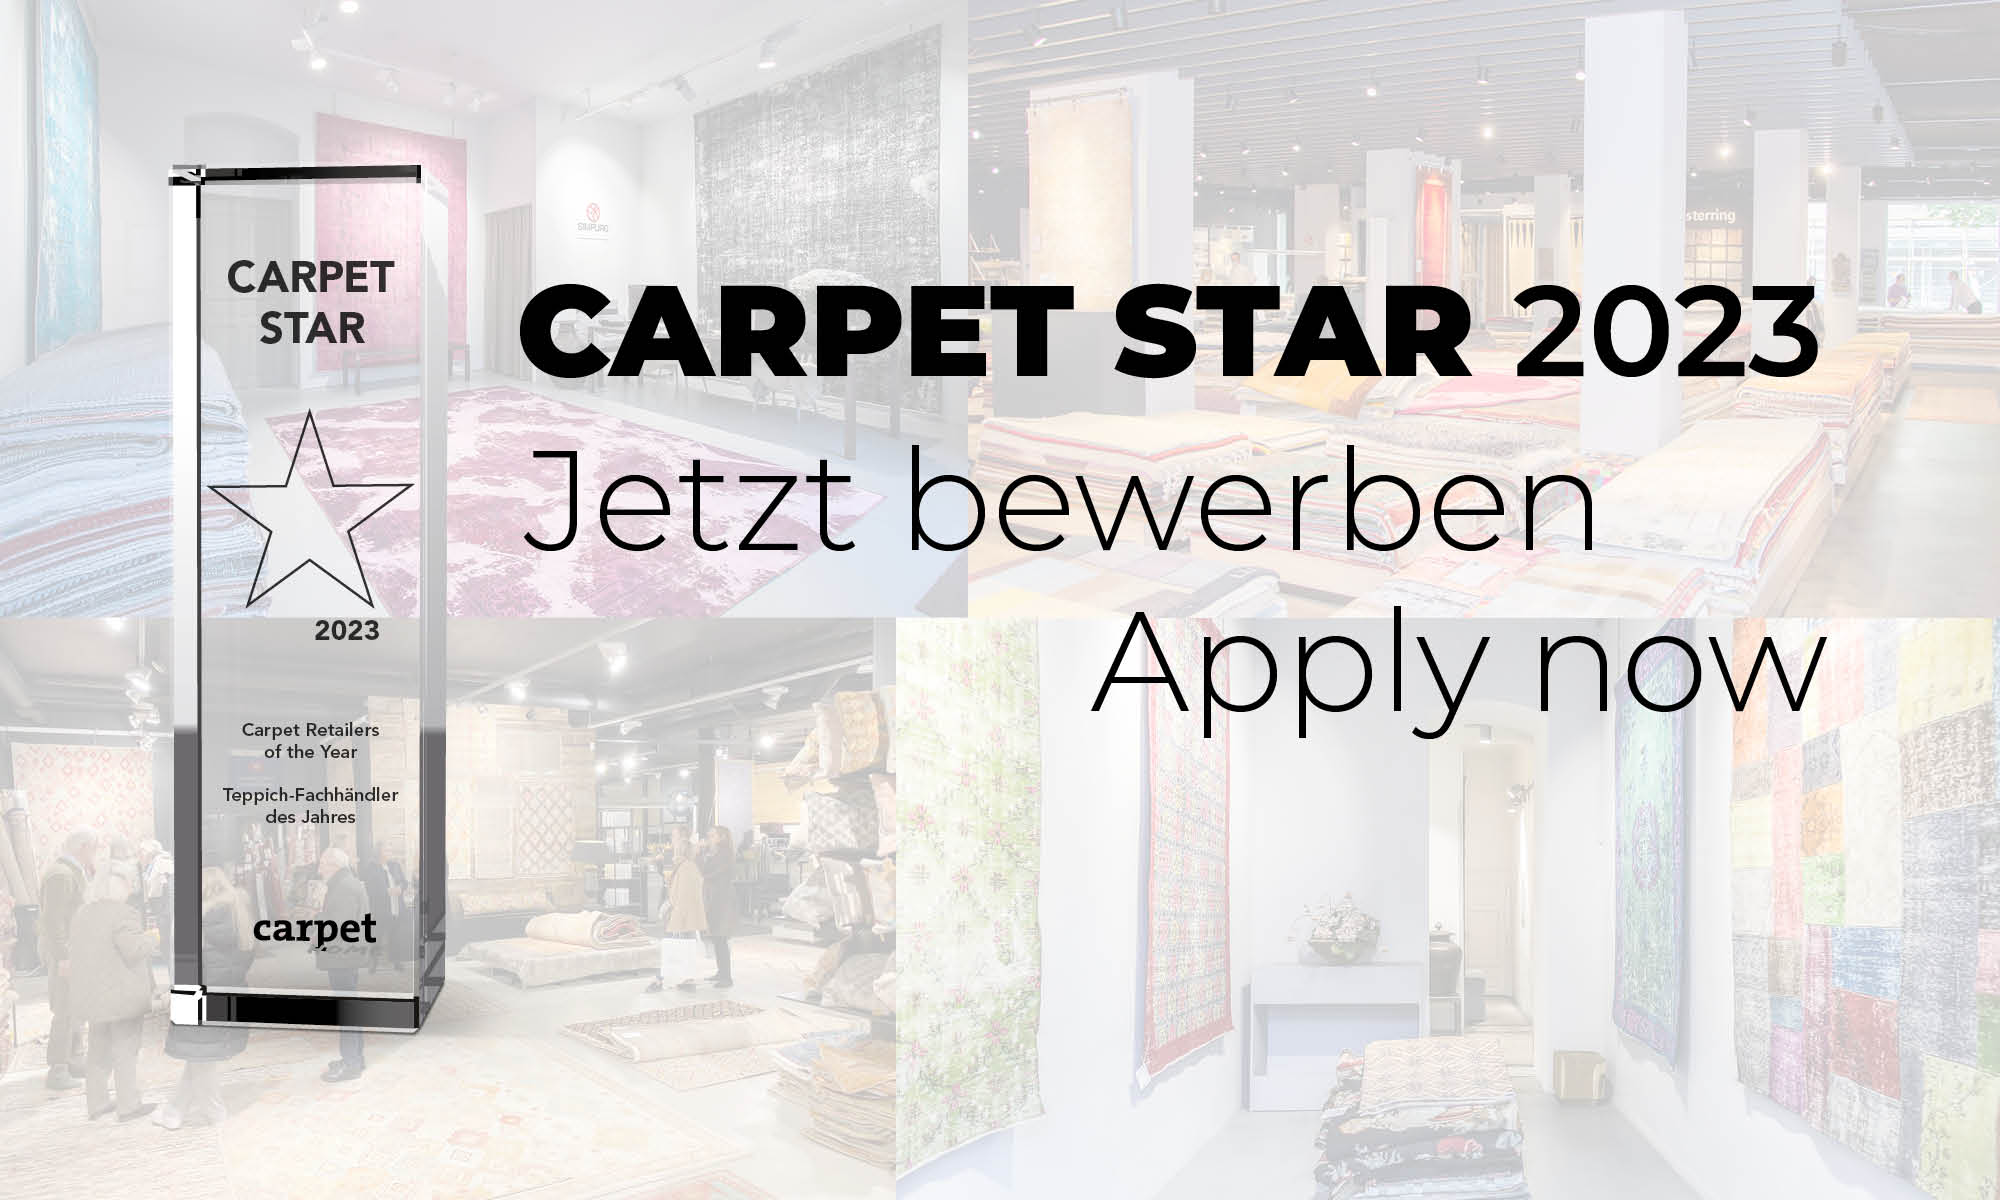 Carpet Star 2023: We are looking for the carpet retailers of the year